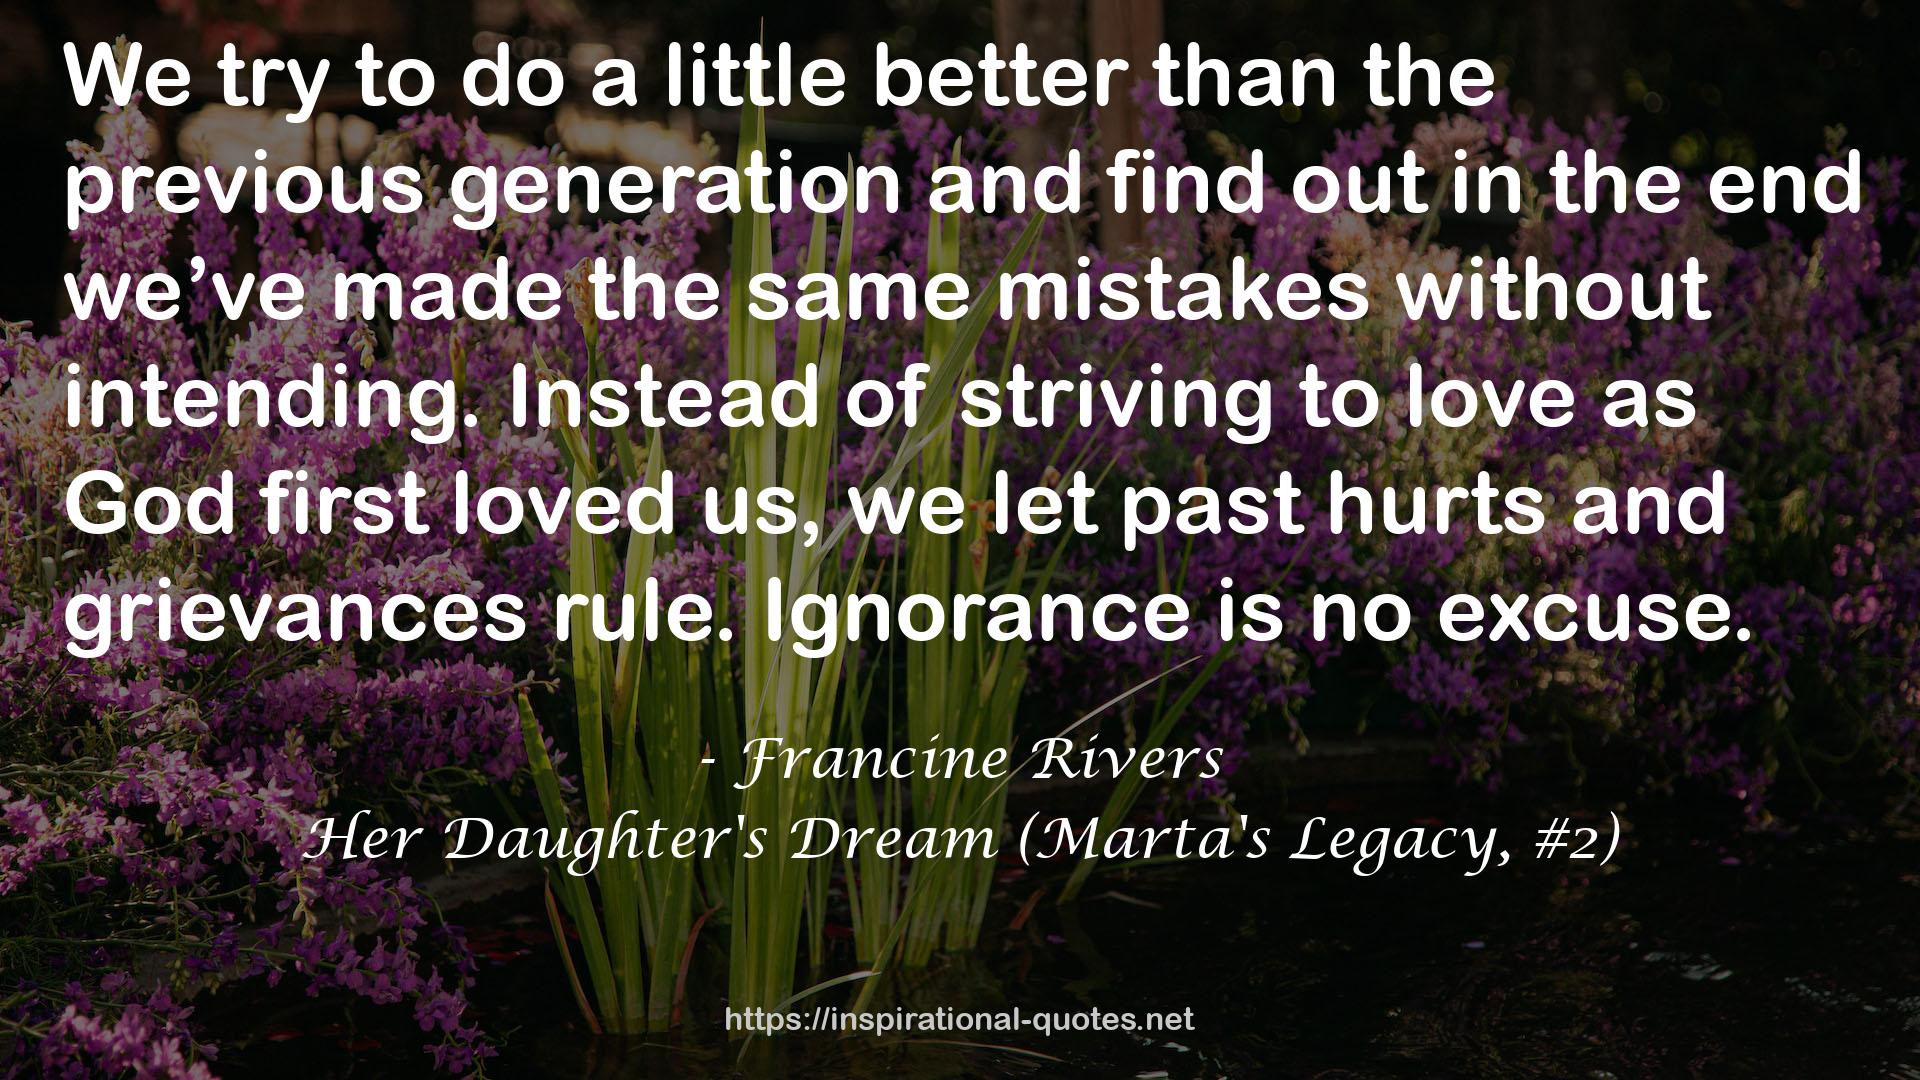 Her Daughter's Dream (Marta's Legacy, #2) QUOTES